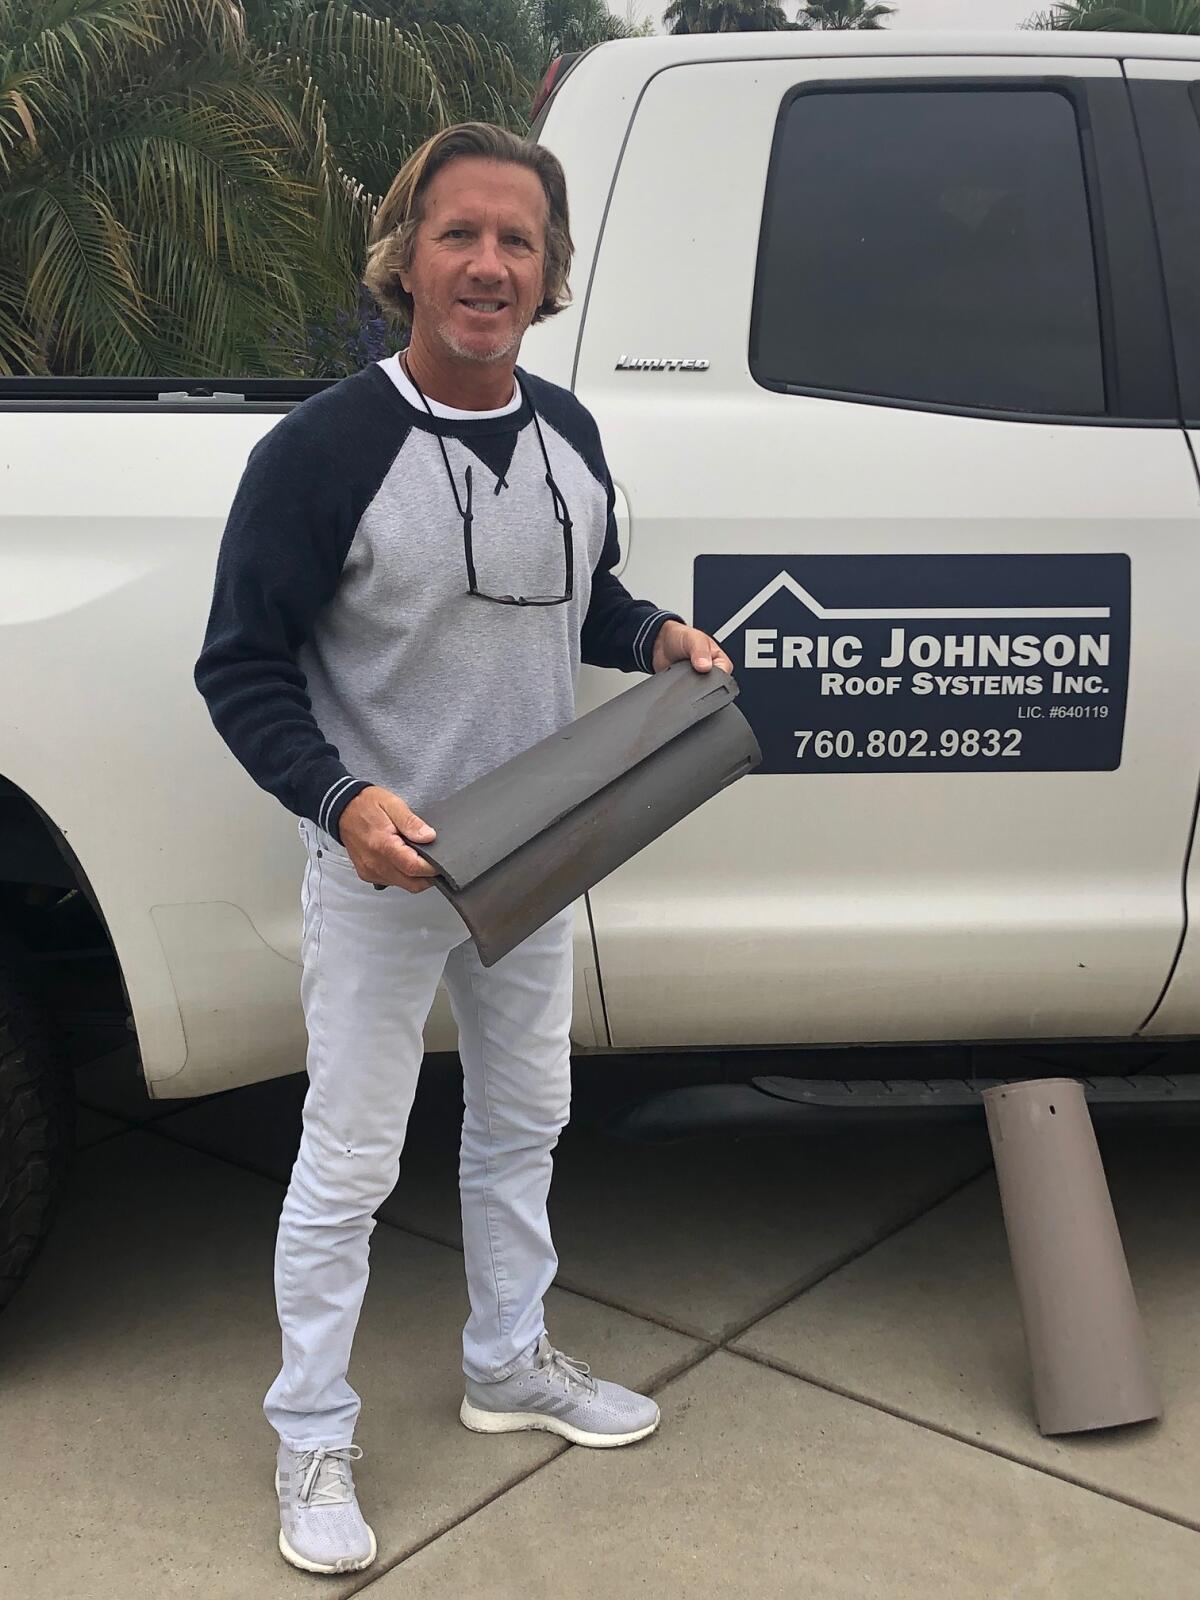 Owner Eric Johnson of Eric Johnson Roof Systems